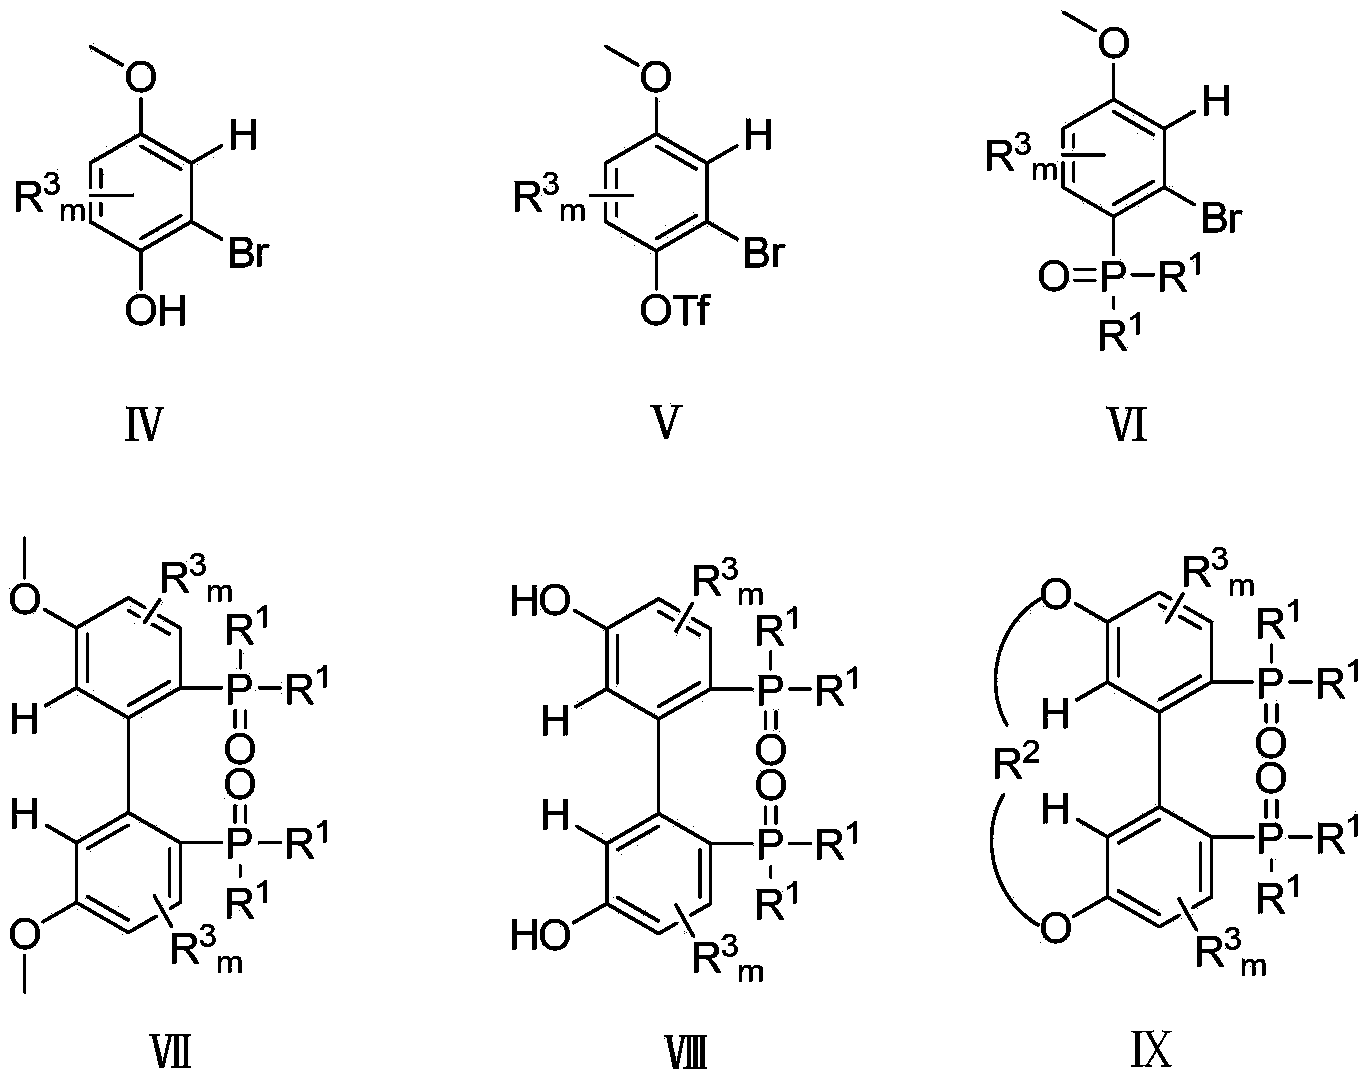 5,5'-connected 1,1'-biphenyl axially chiral 2,2'-diphosphine ligand and preparation method thereof